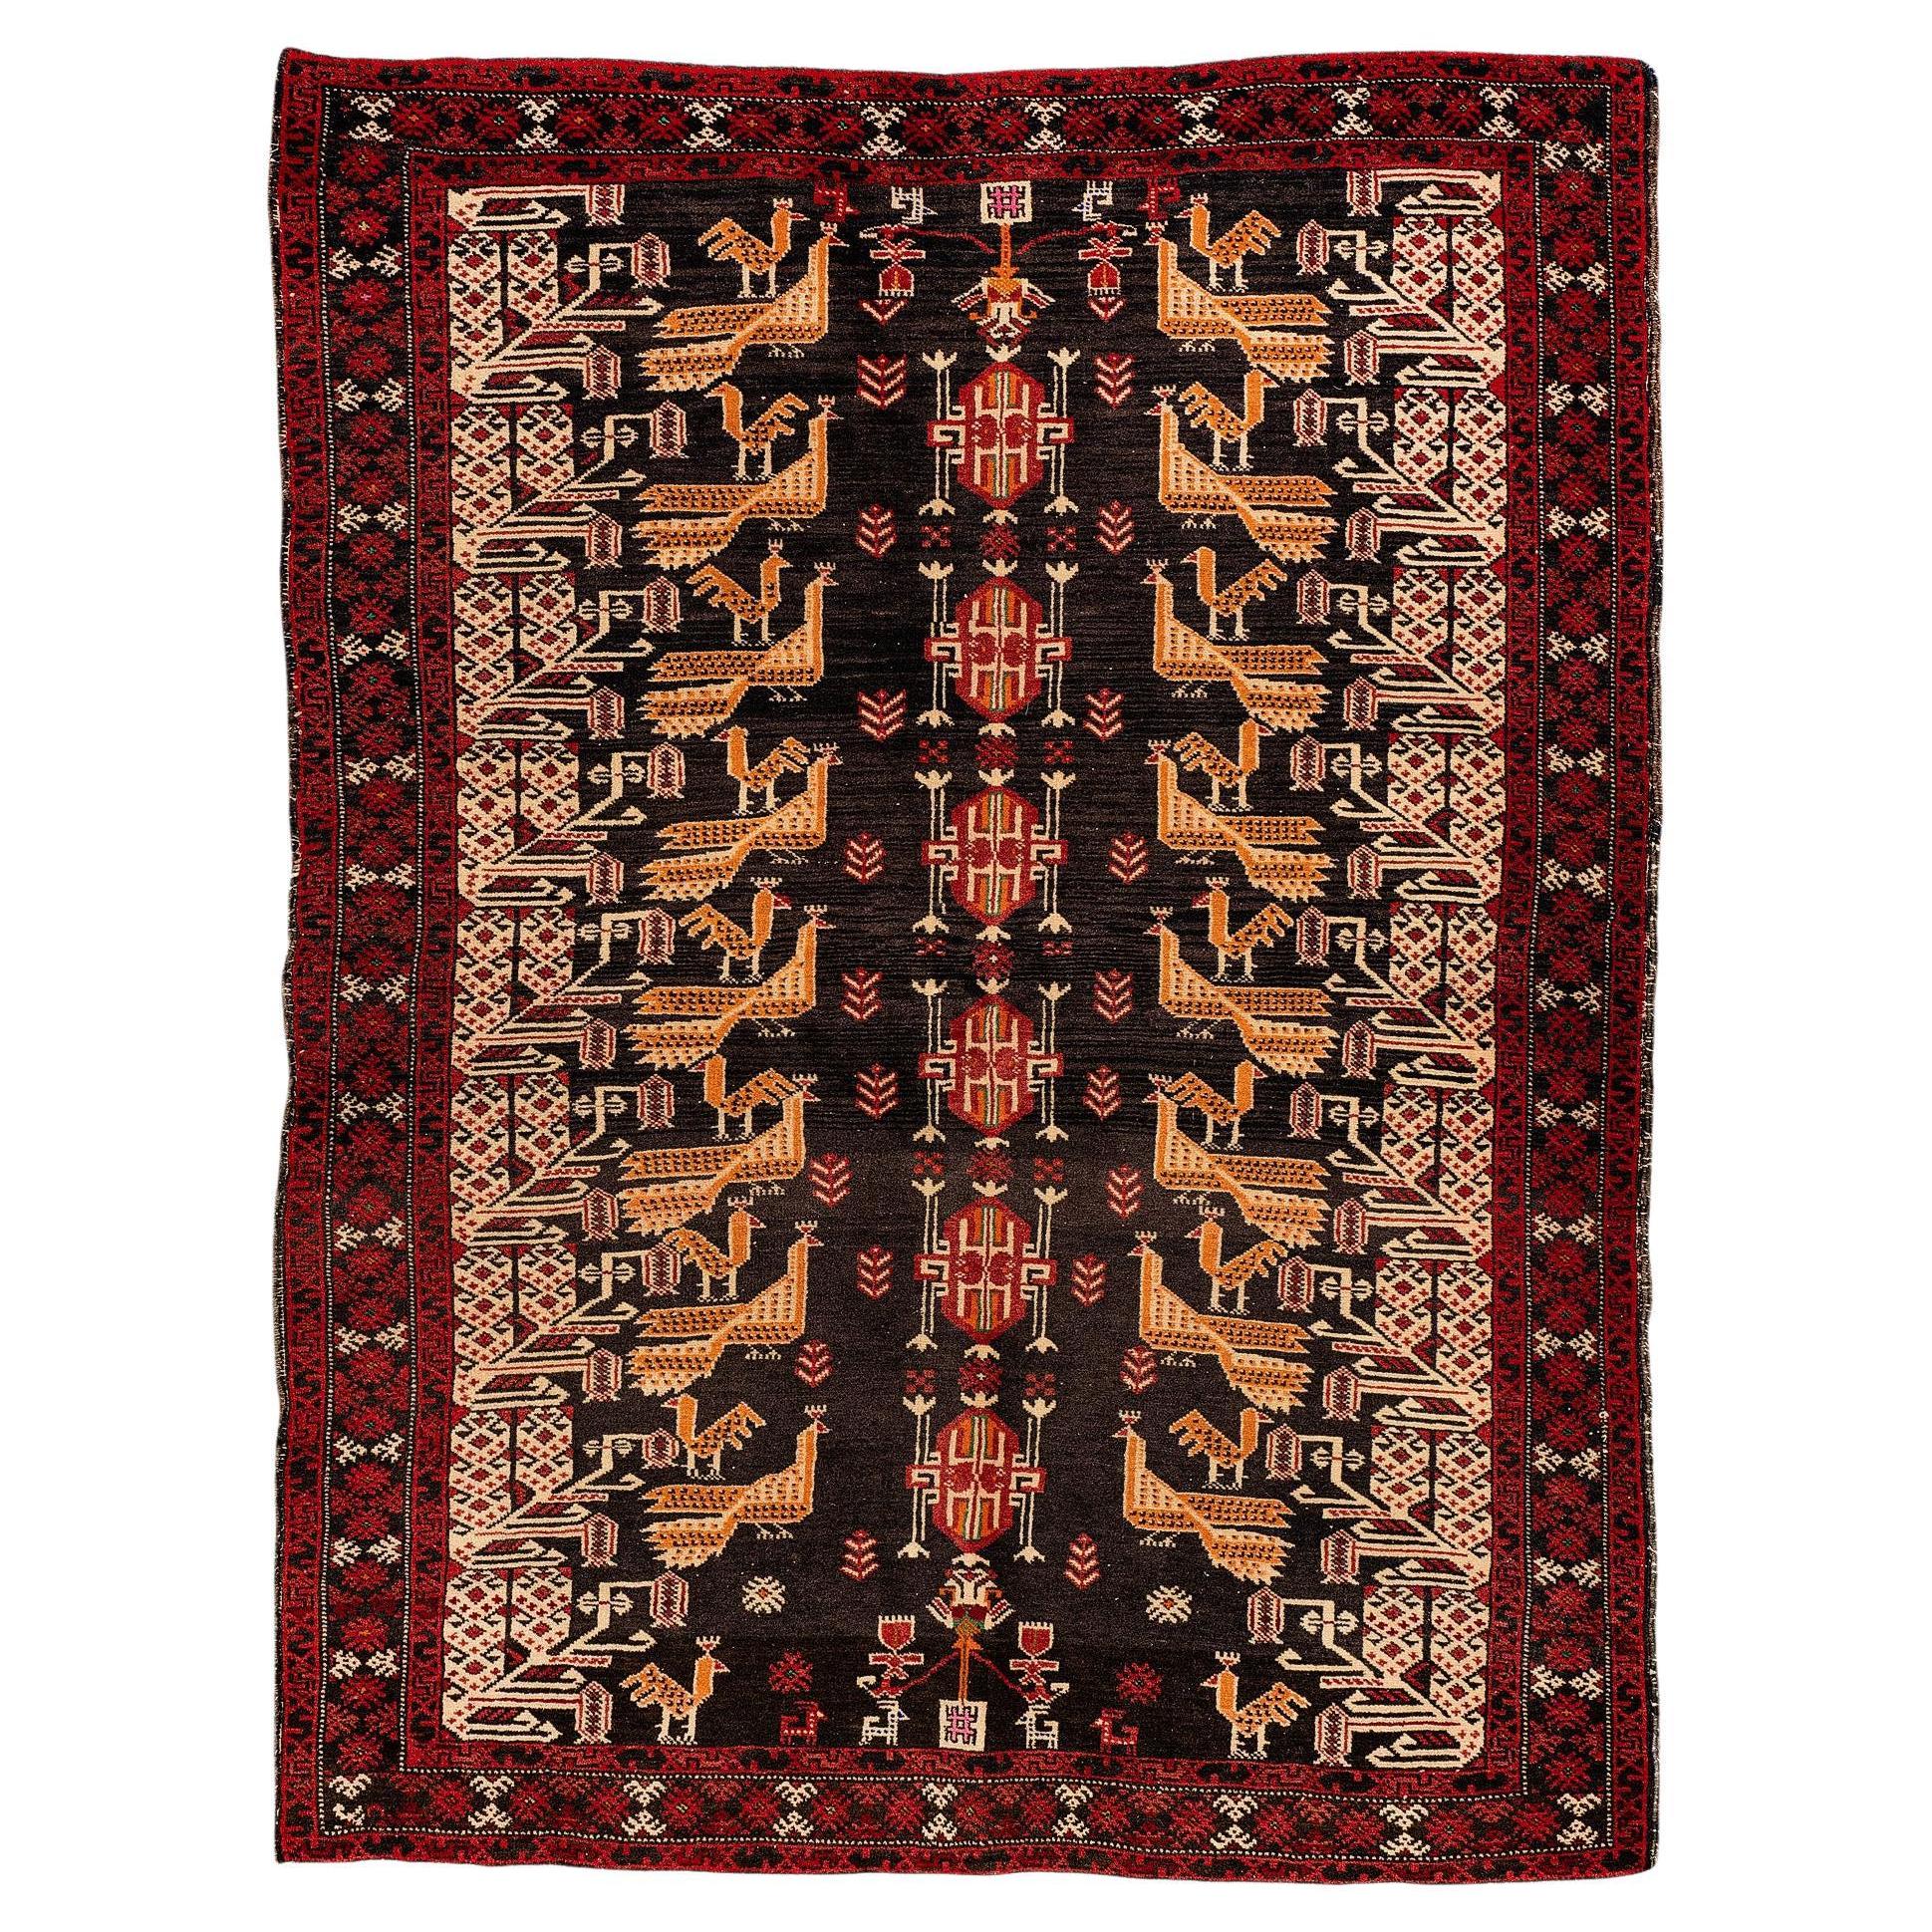 Baluche - East Persia

This is a beautiful Persian Baluche rug handmade in the 1950s. It has a black background and red borders. The main highlight is the two columns of yellow peacocks in the centre of the carpet and other geometric figures. It is